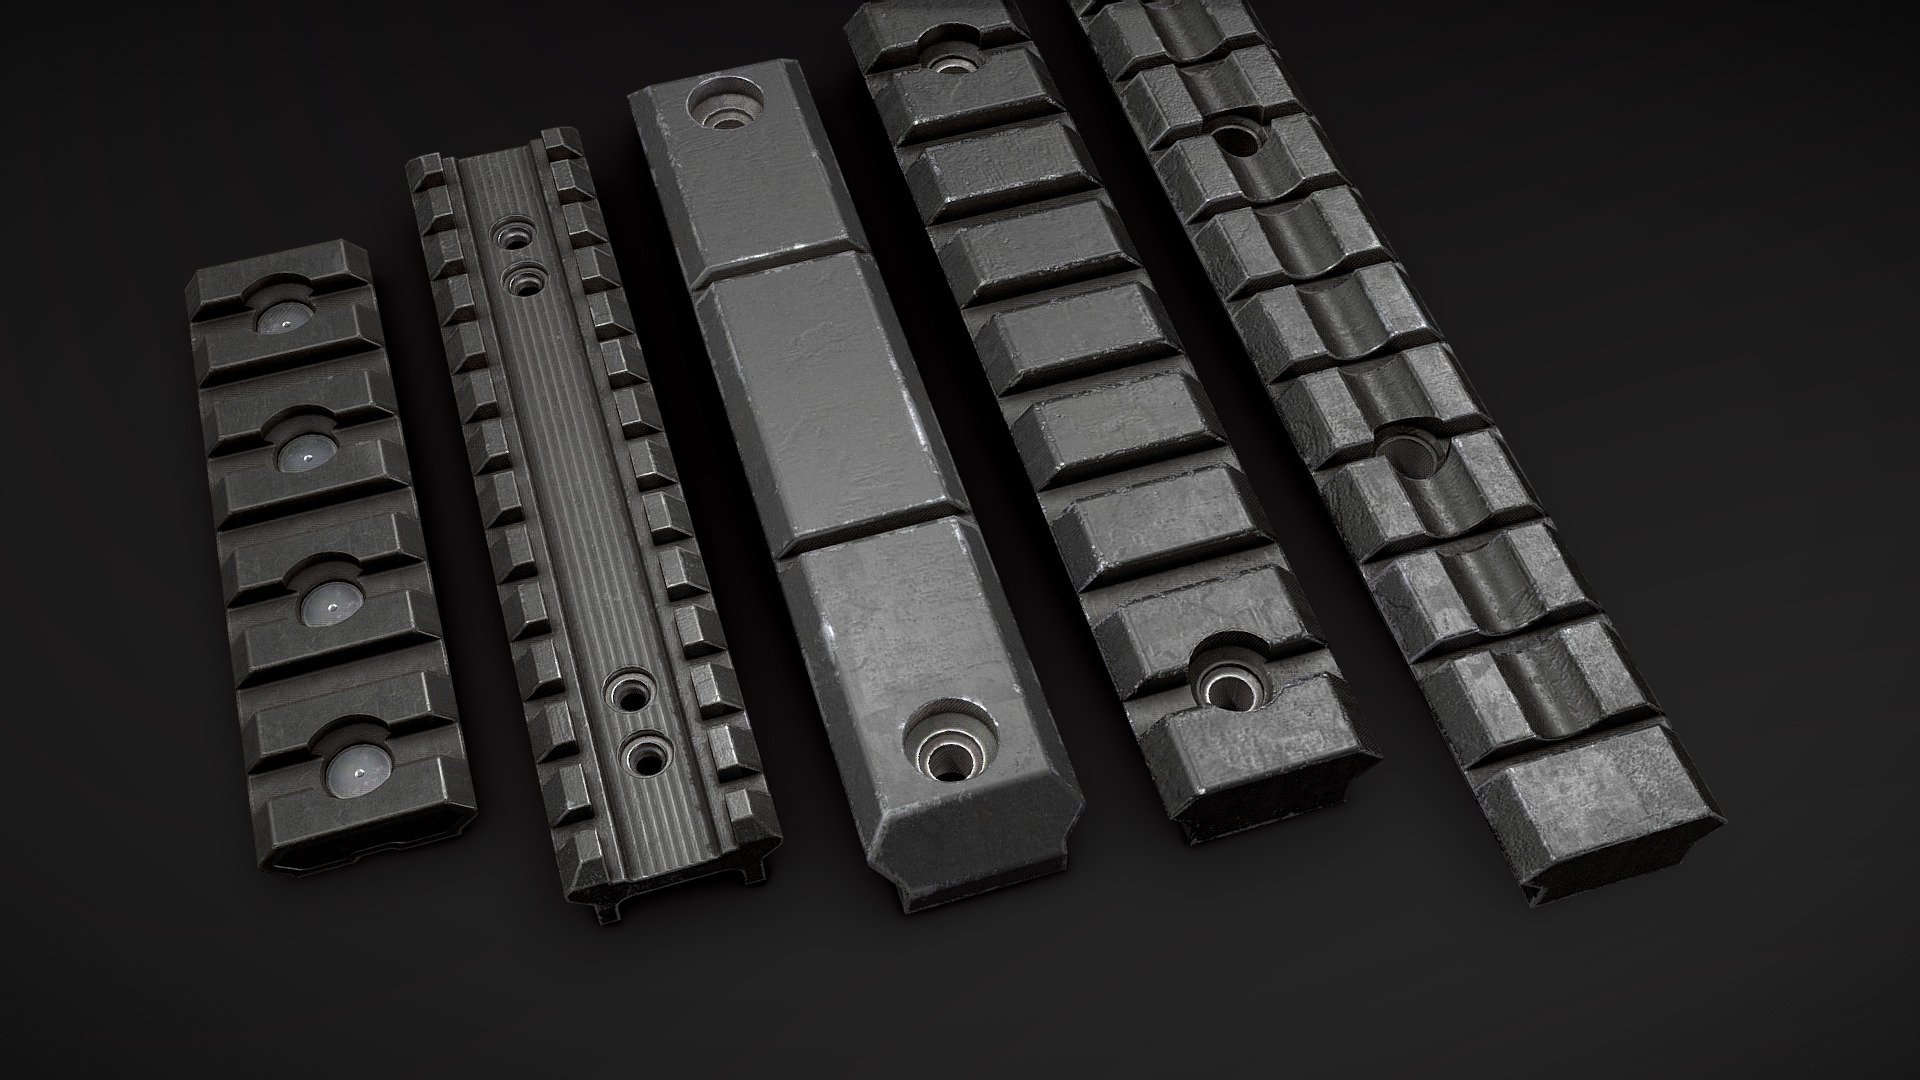 A personal project about learning Houdini and procedural modeling.

Back when I first started learning hard surface modeling, I remember struggling when making  Picatinny rails haha.

Now I am back for redemption and can generate any Picatinny rail I want, both a high poly and low poly! Slap a smart material on it in substance and this is the result!
These 5 were made using the tool but many more variations are possible.

Hope you enjoy!

Art station and minor breakdown of the Houdini project itself coming soon :) - Picatinny Rails - Houdini Generated - Download Free 3D model by AntijnvanderGun 3d model